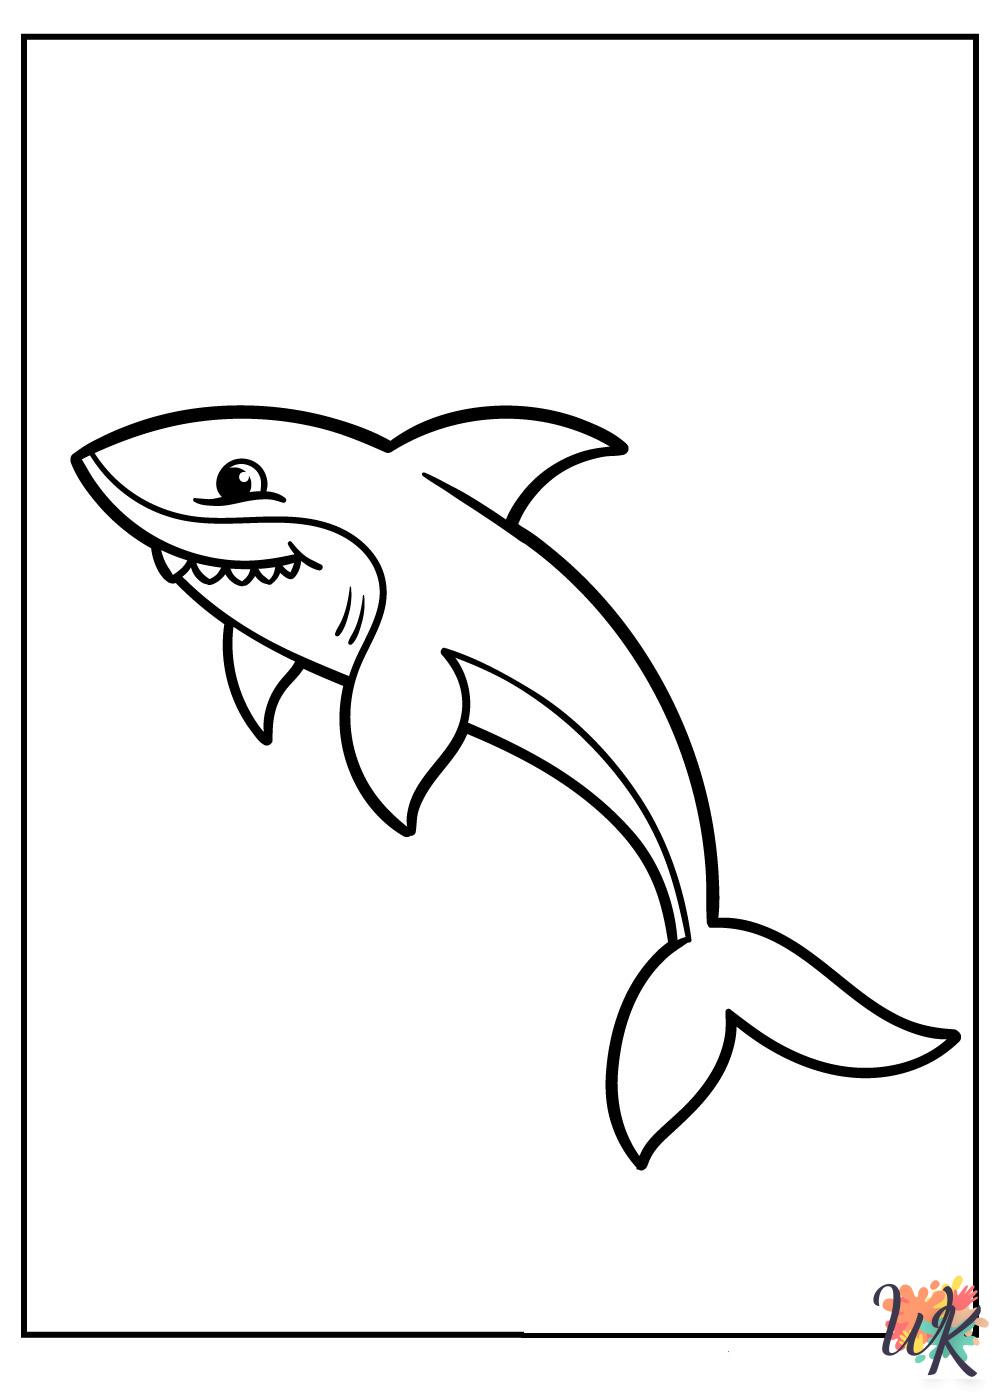 coloring pages for Under The Sea